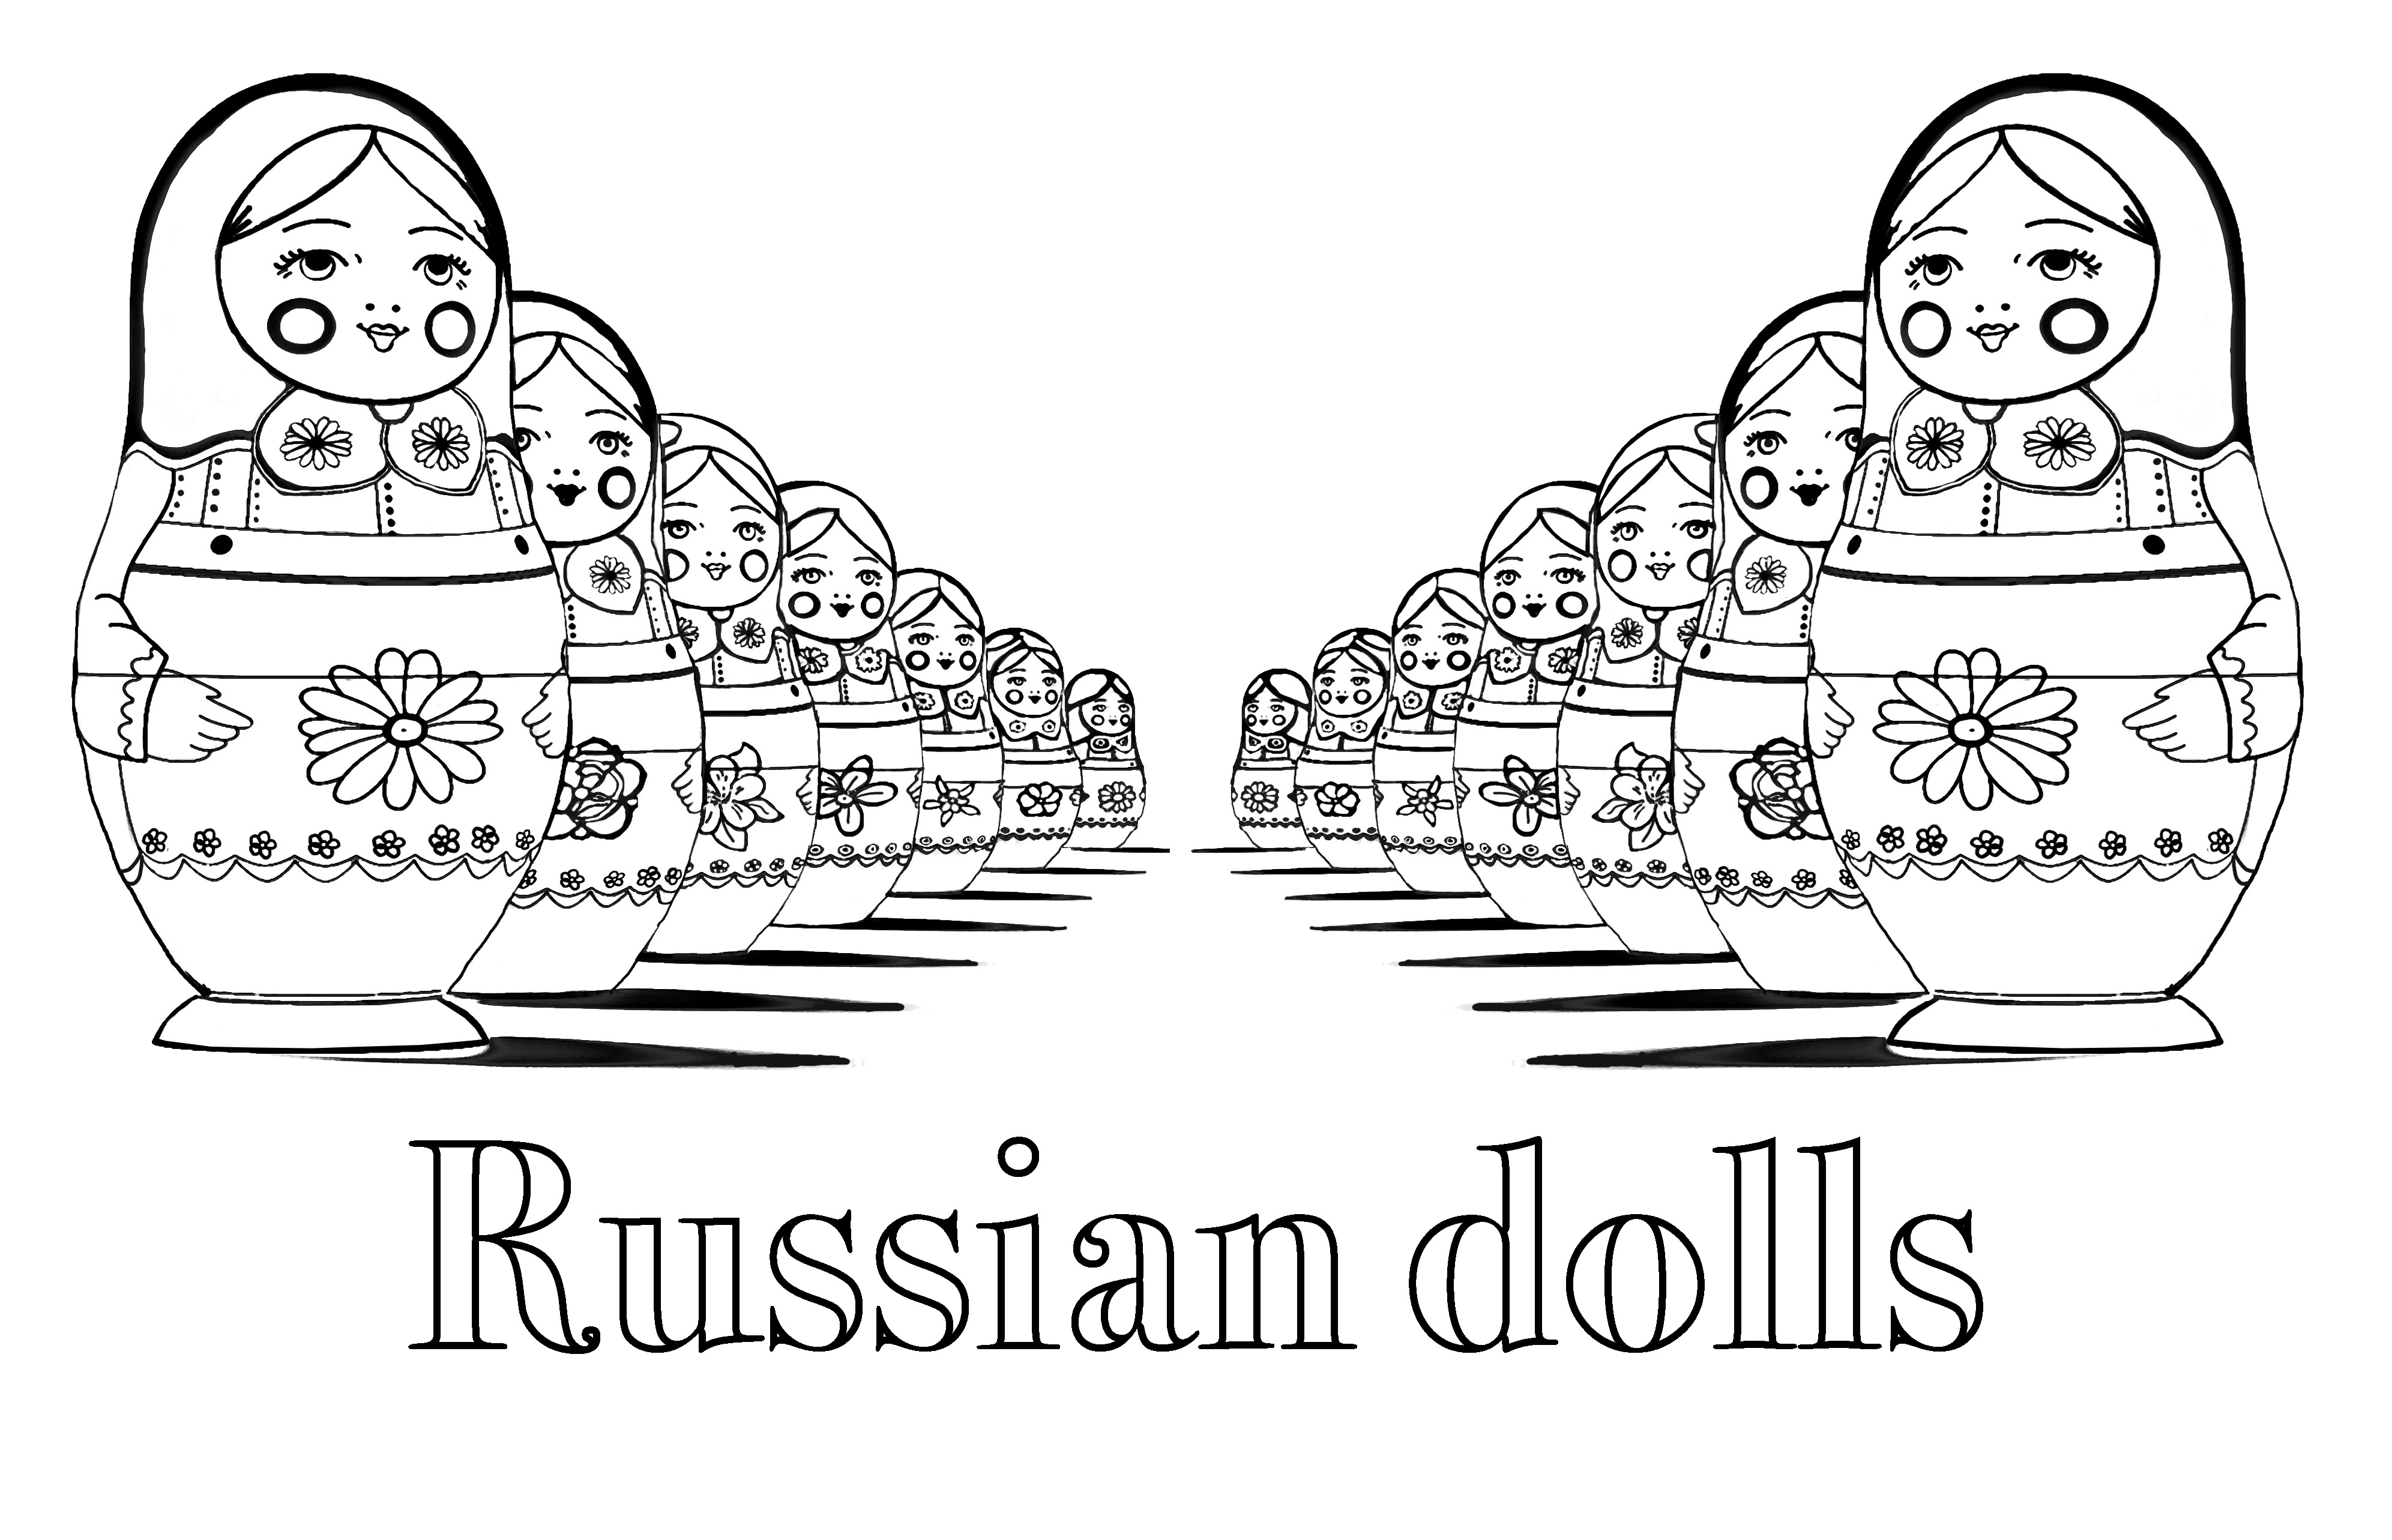 Russian dolls : with perspective effect : Double version with text